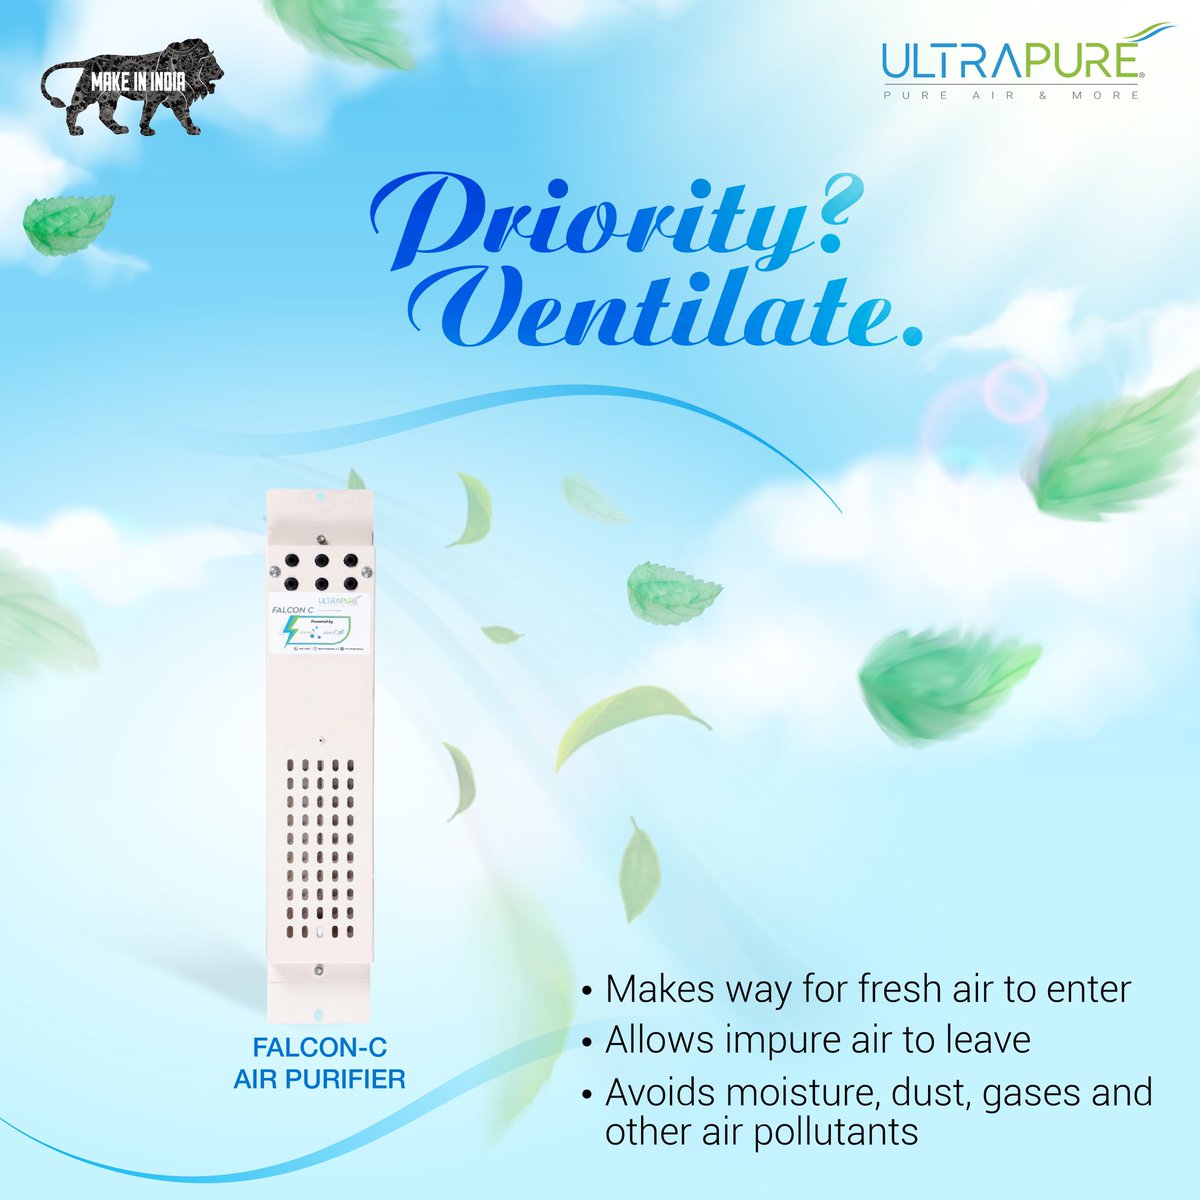 This is your sign to prioritise ventilation!

Check us out at: ultrapureindia.in
Or call us on: 1800-110-050

#ultrapure #airpurifier #airpurification #filterair #airfilter #pureair #cleanair #hospital #breatheclean #freshness #freshair #healthyair #airport #Make_In_India